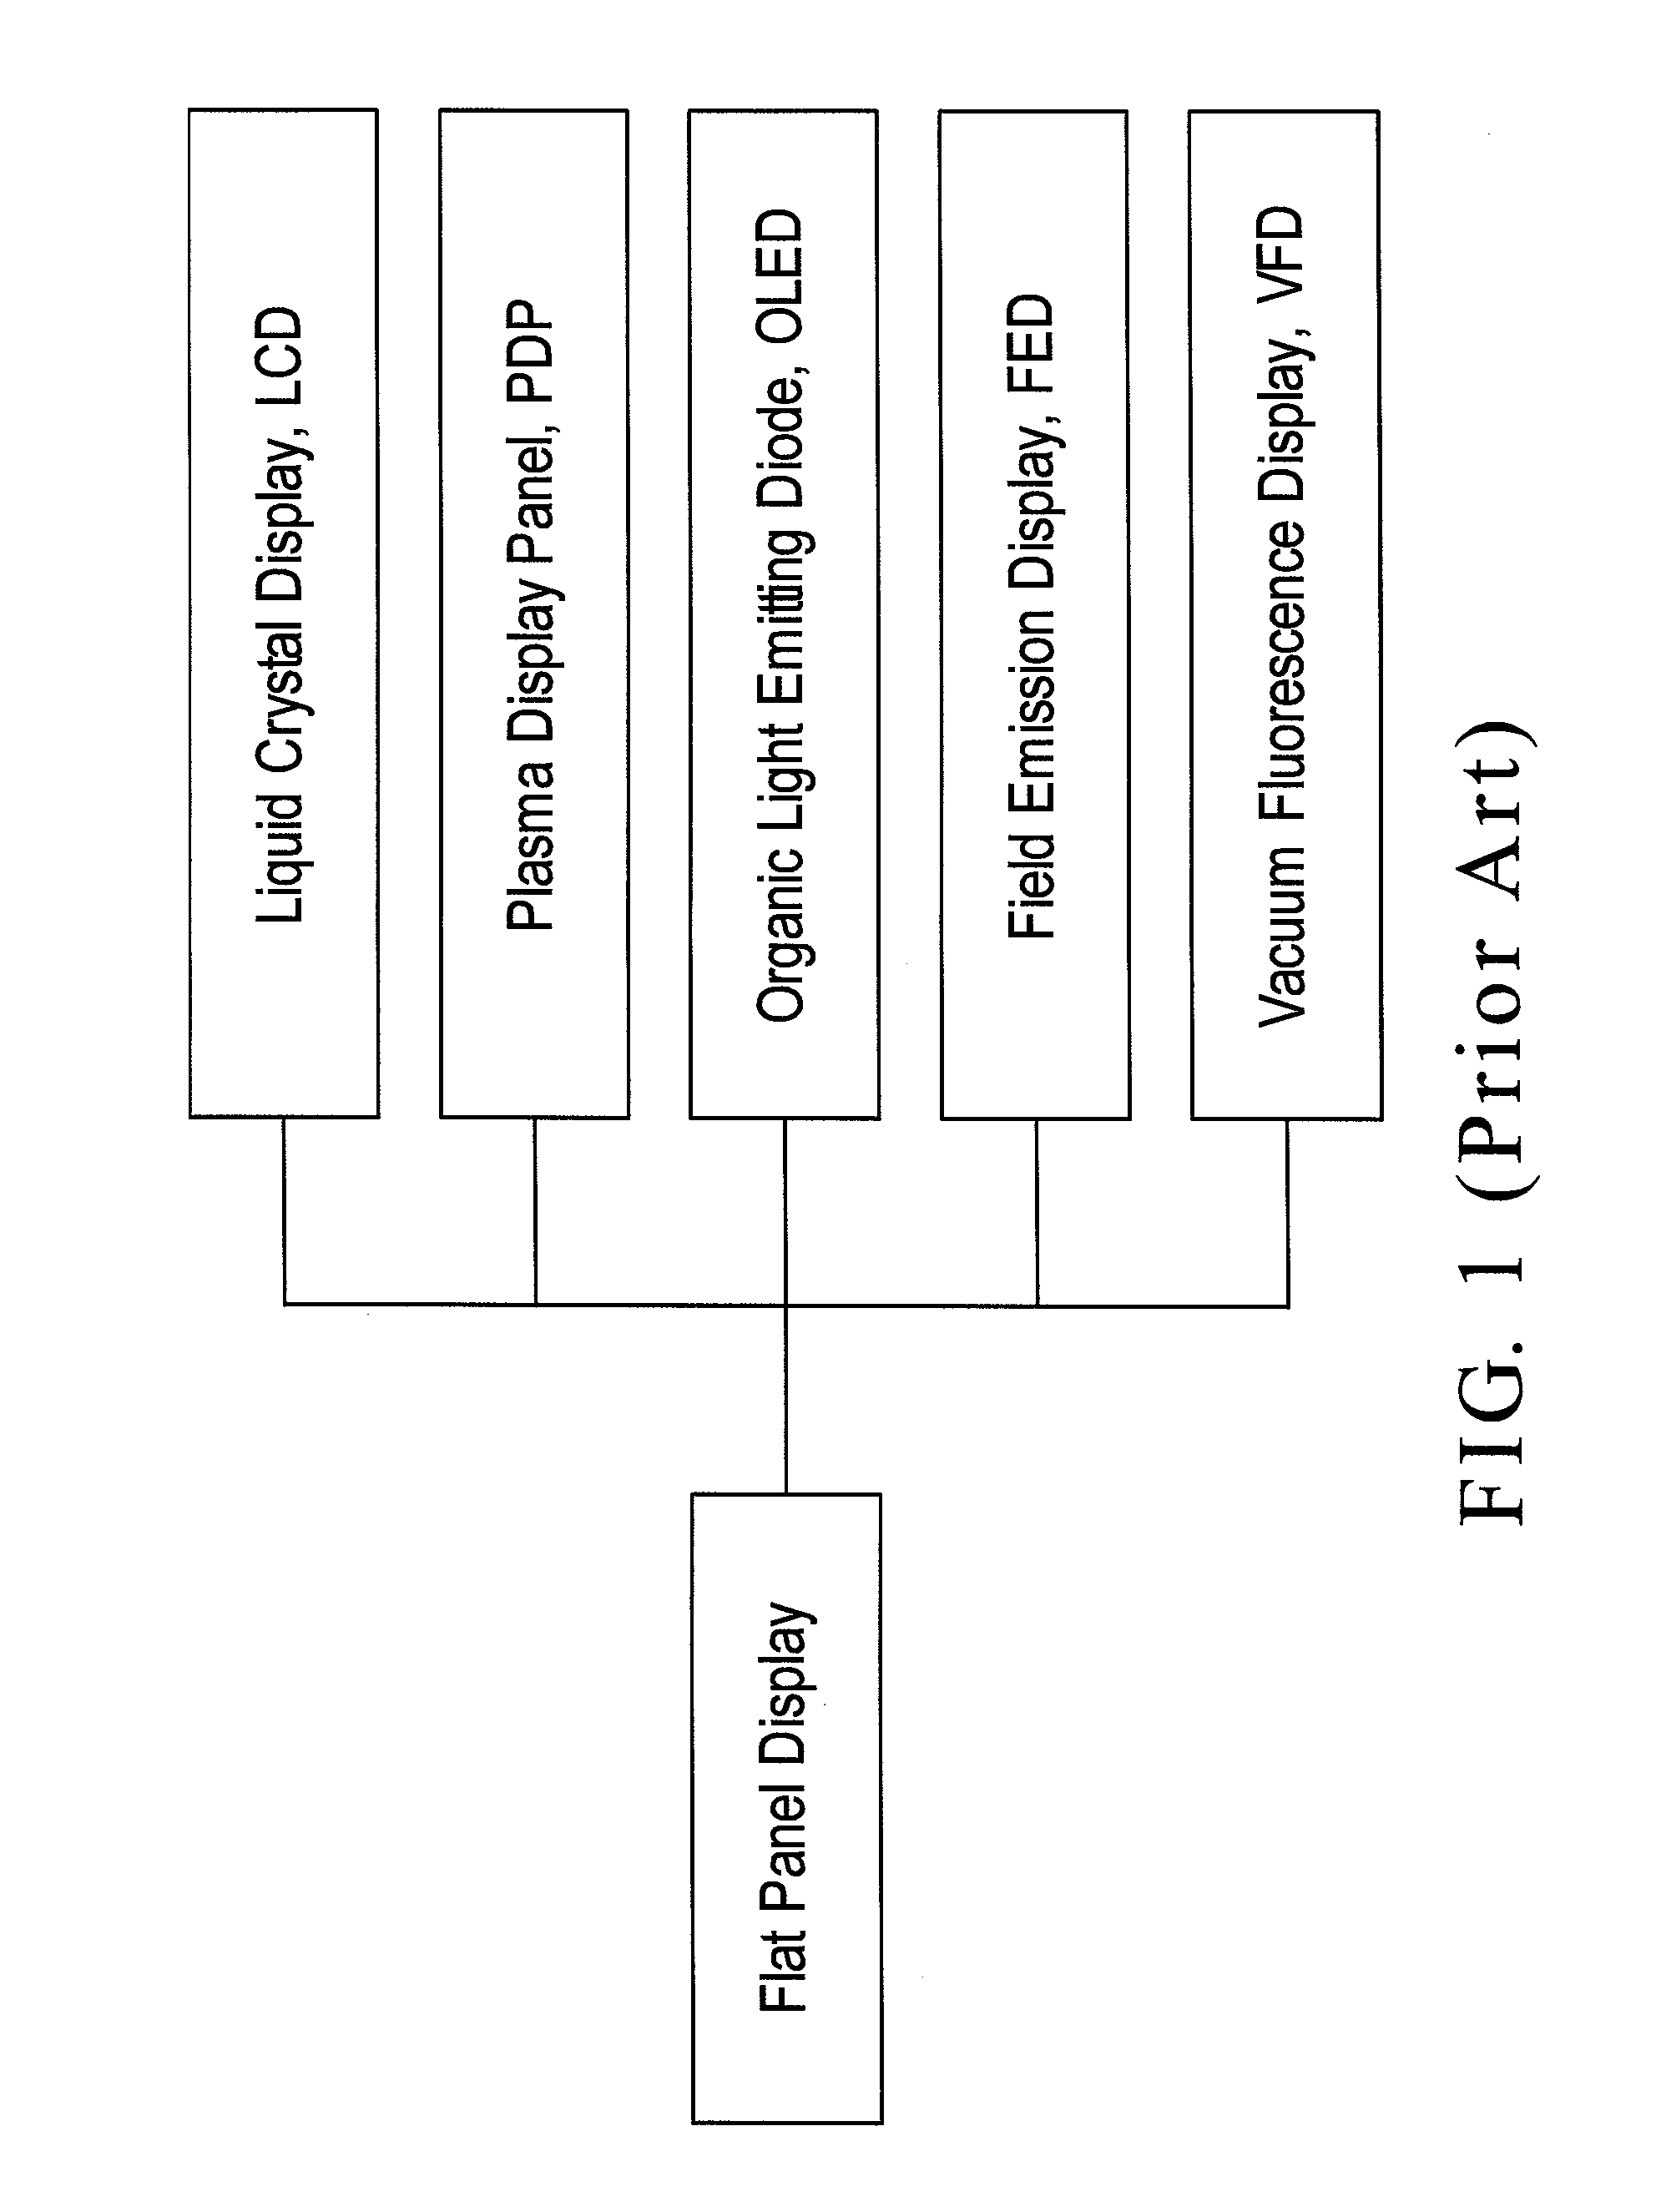 High-accuracy OLED touch display panel structure